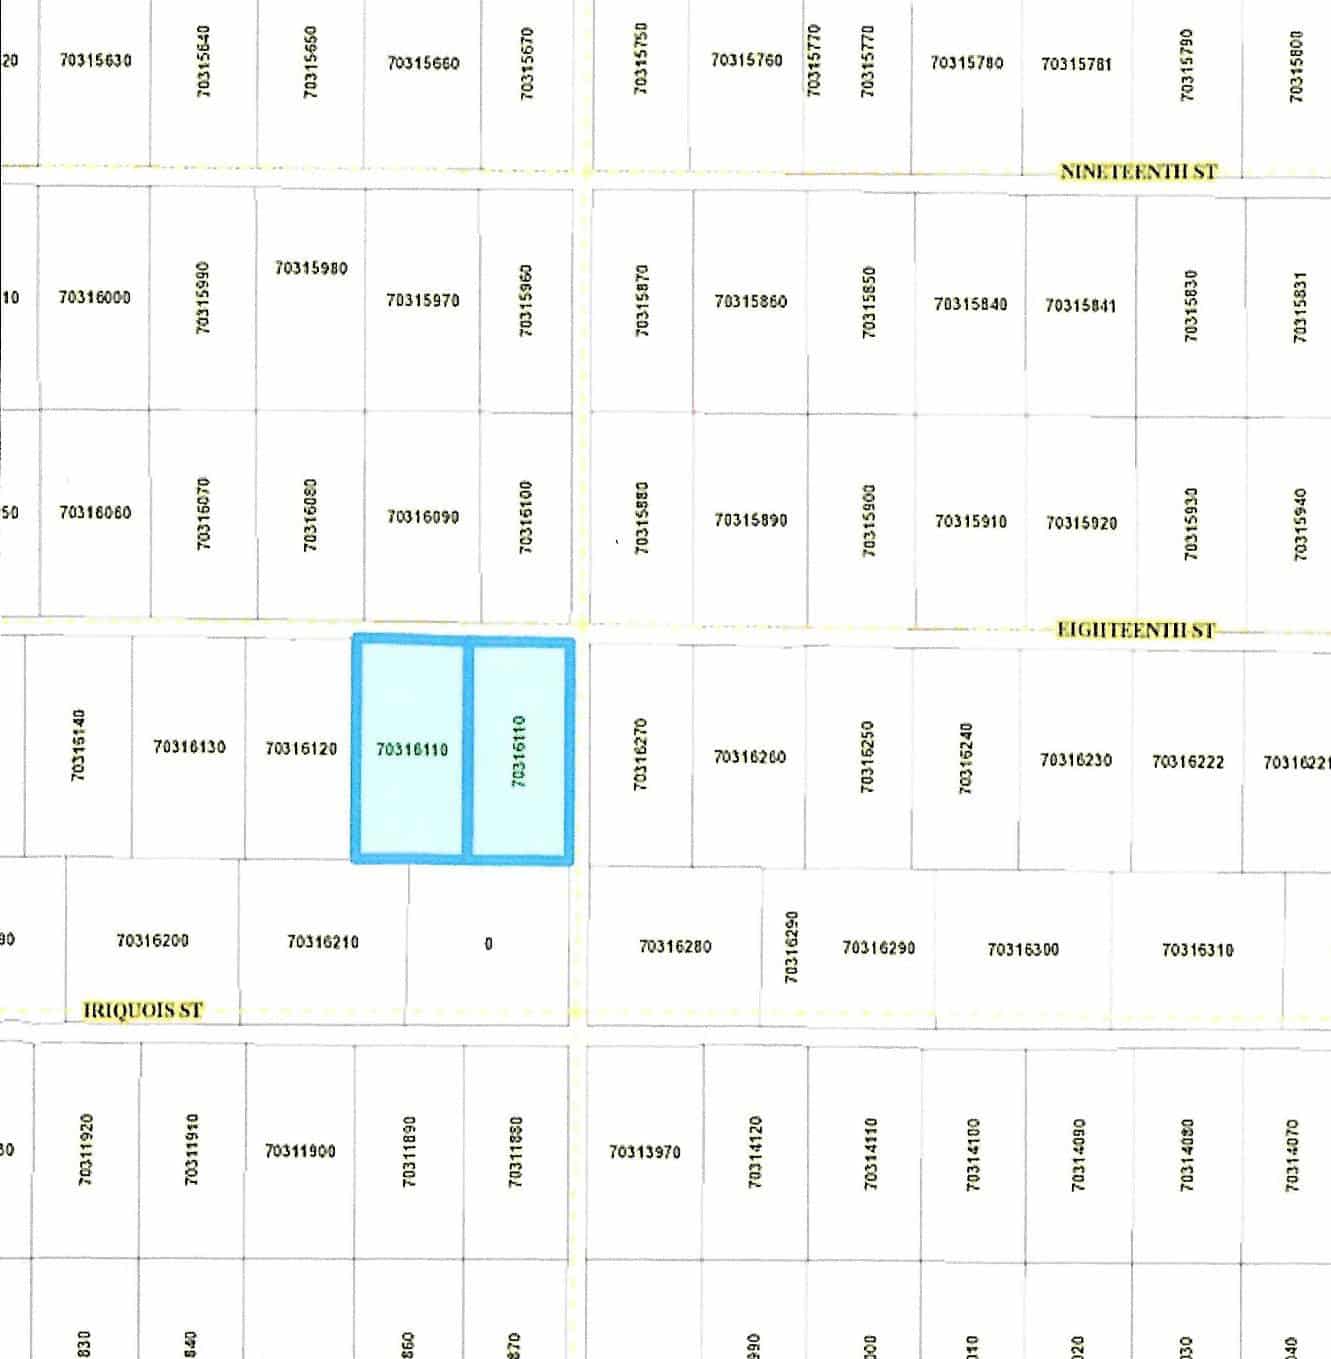 10-Acres-SLVR-On-18th-Street-Lots-1--2-Tax-Mapl-Scan